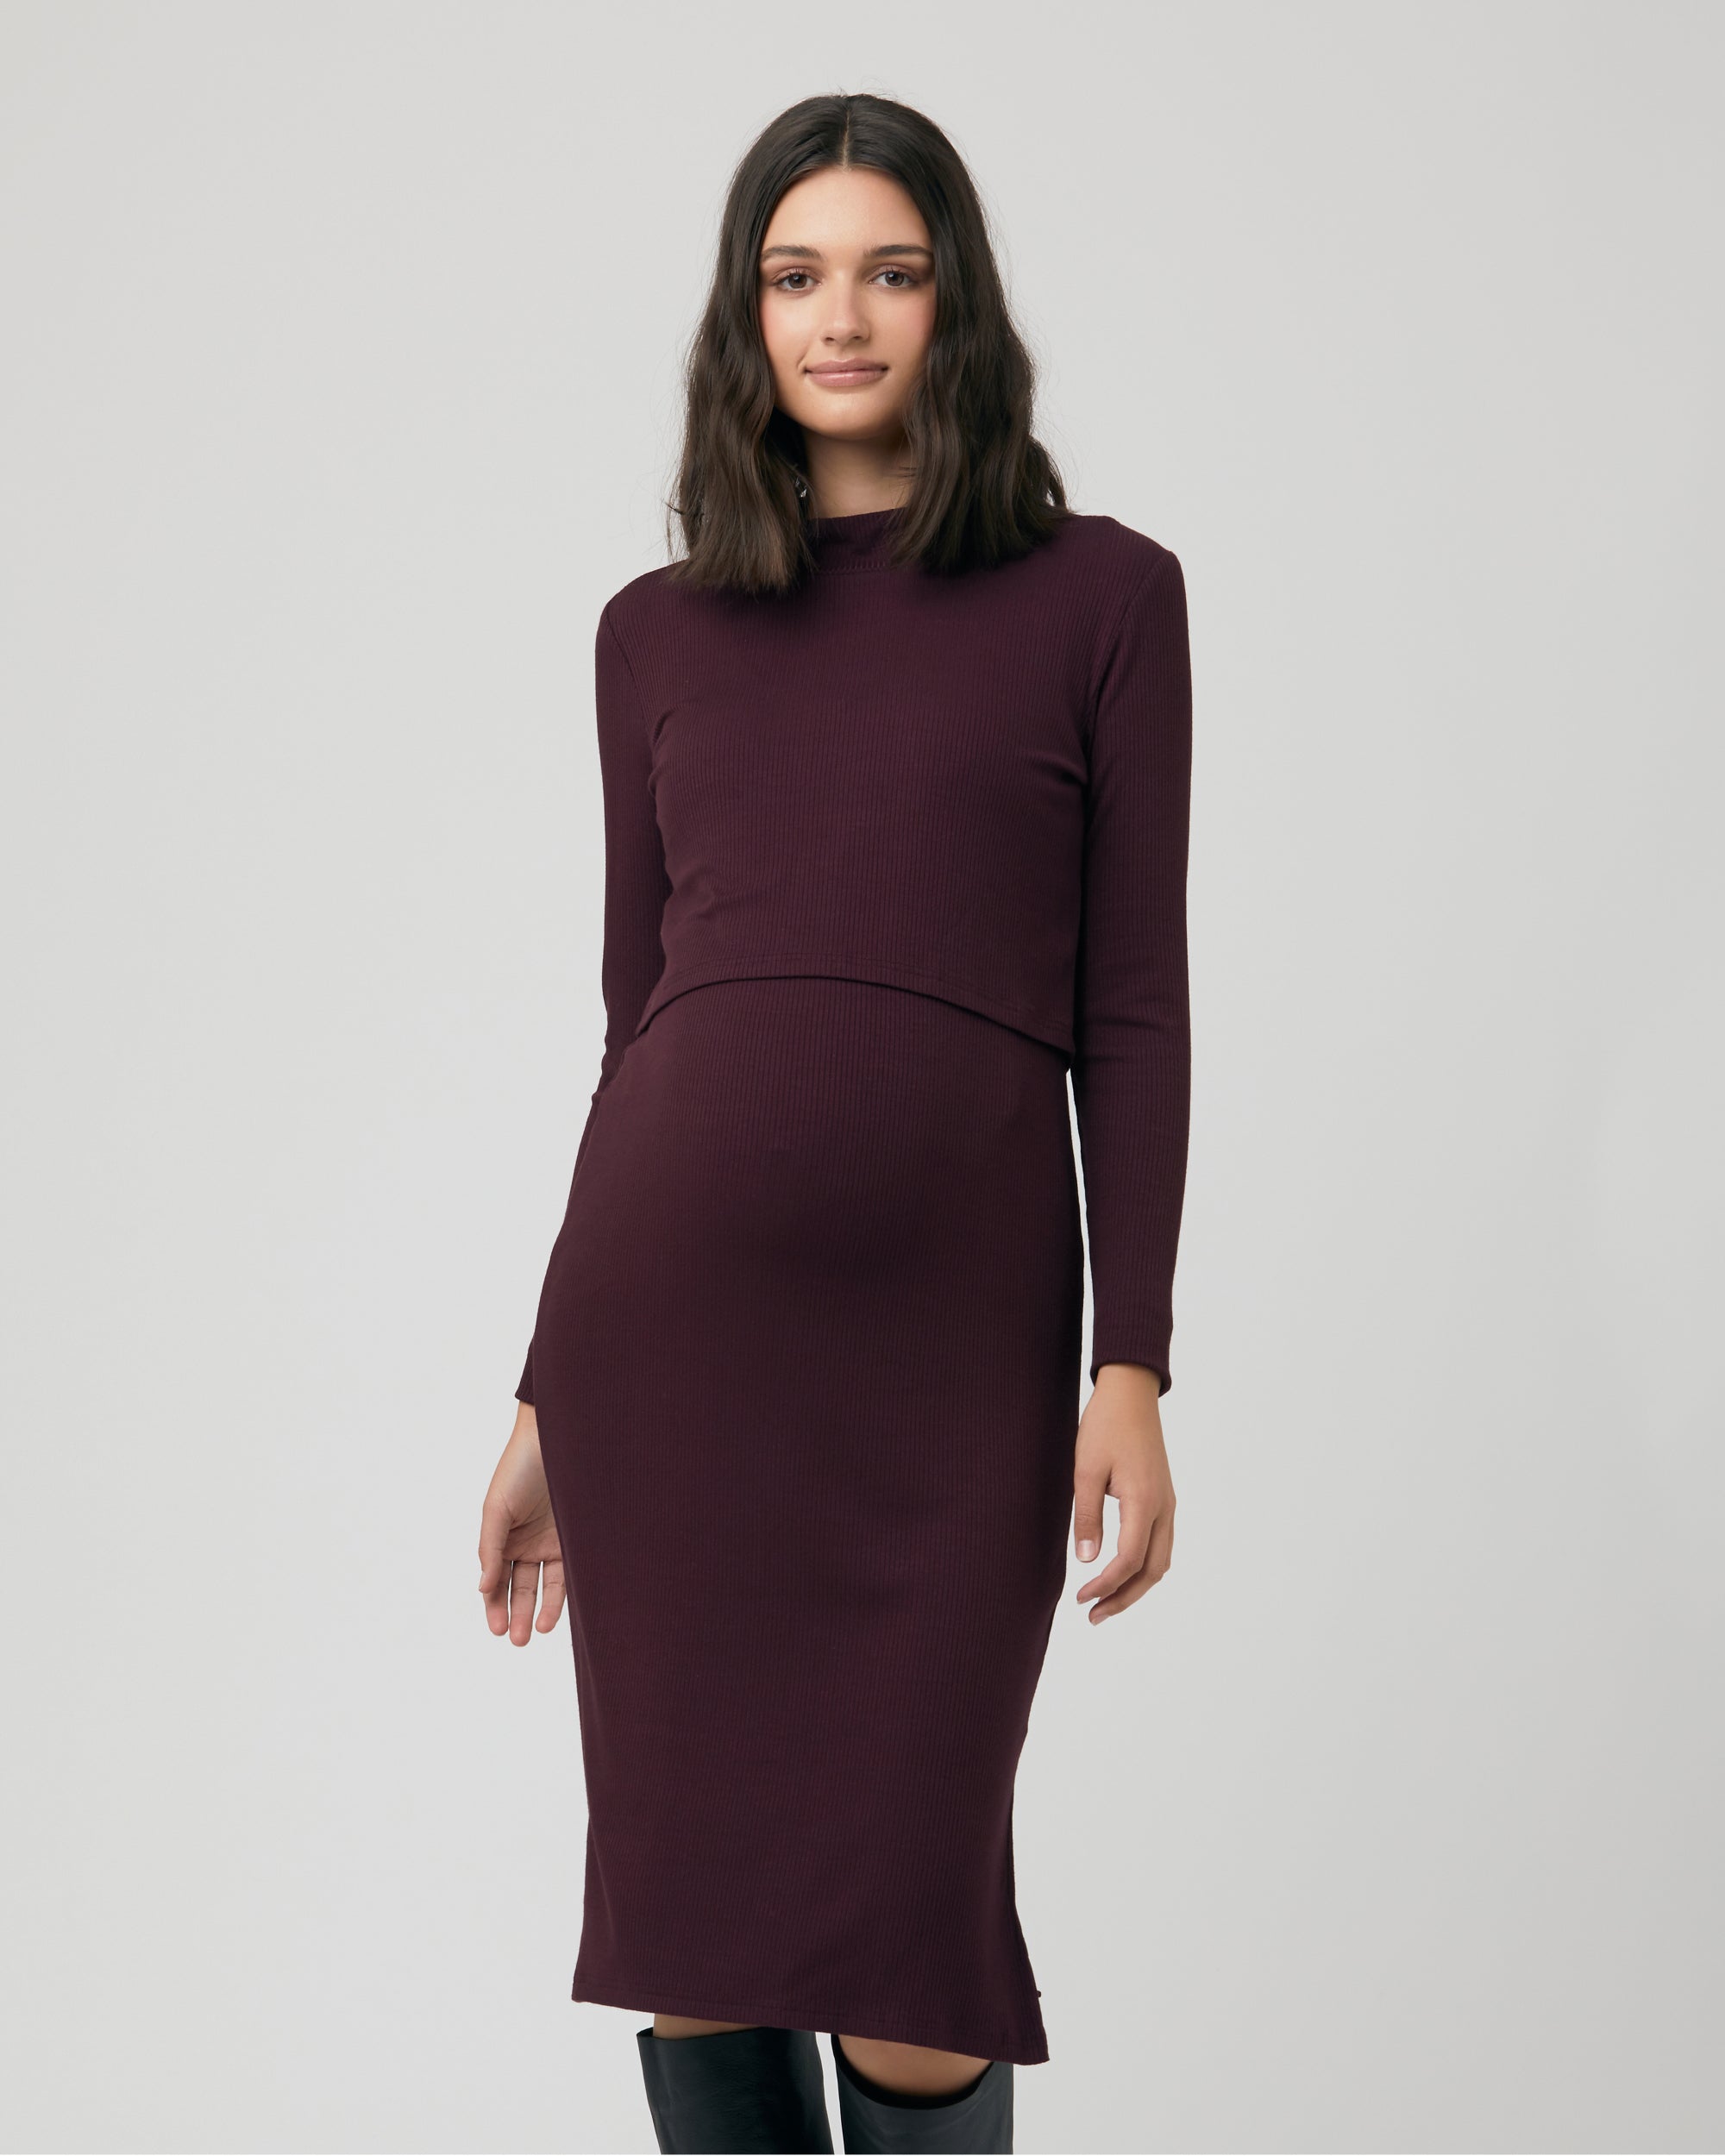 Ripe Maternity 'Tillly' Rib Dress - Dusty Coral - Little Miracles